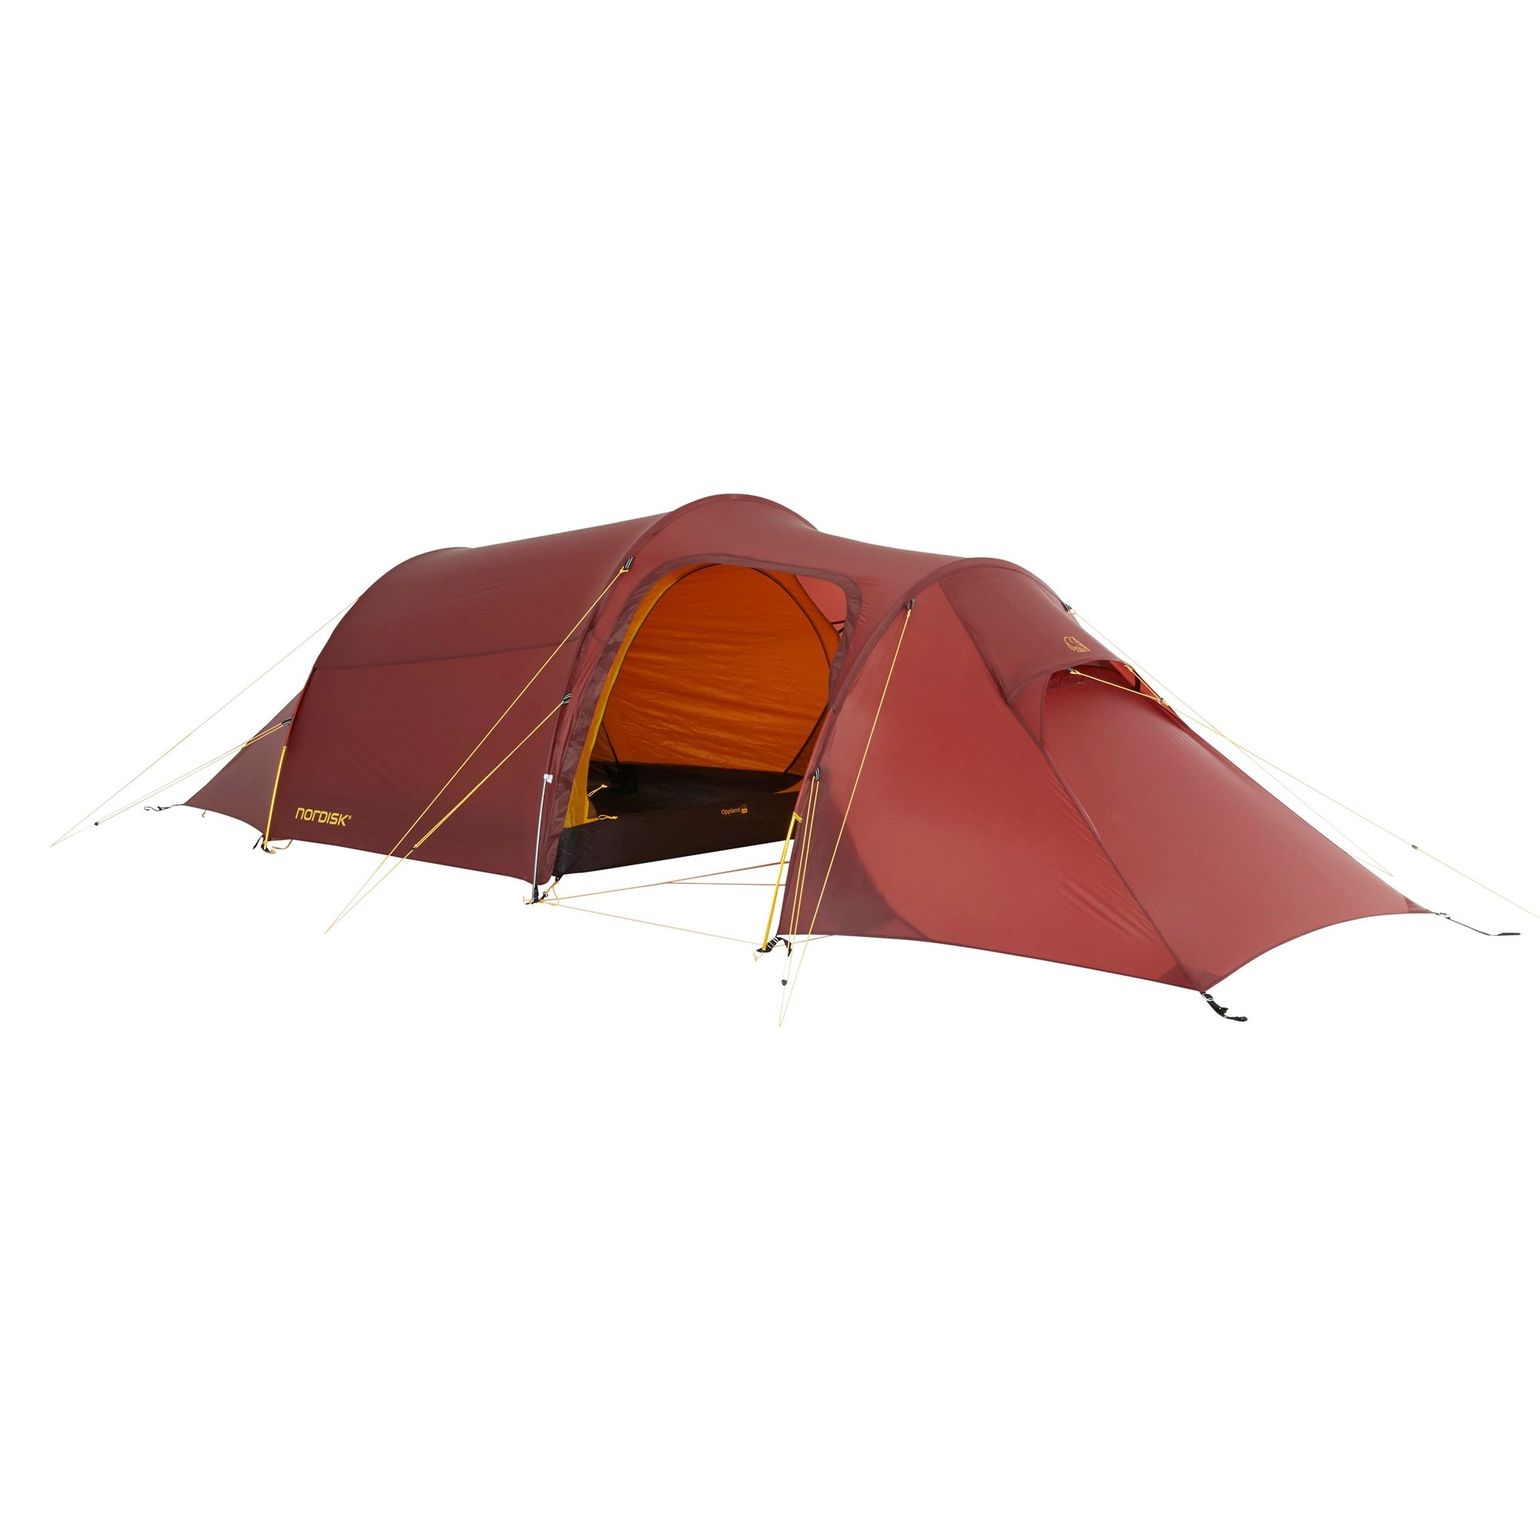 Oppland 2 LW Tent Burnt Red